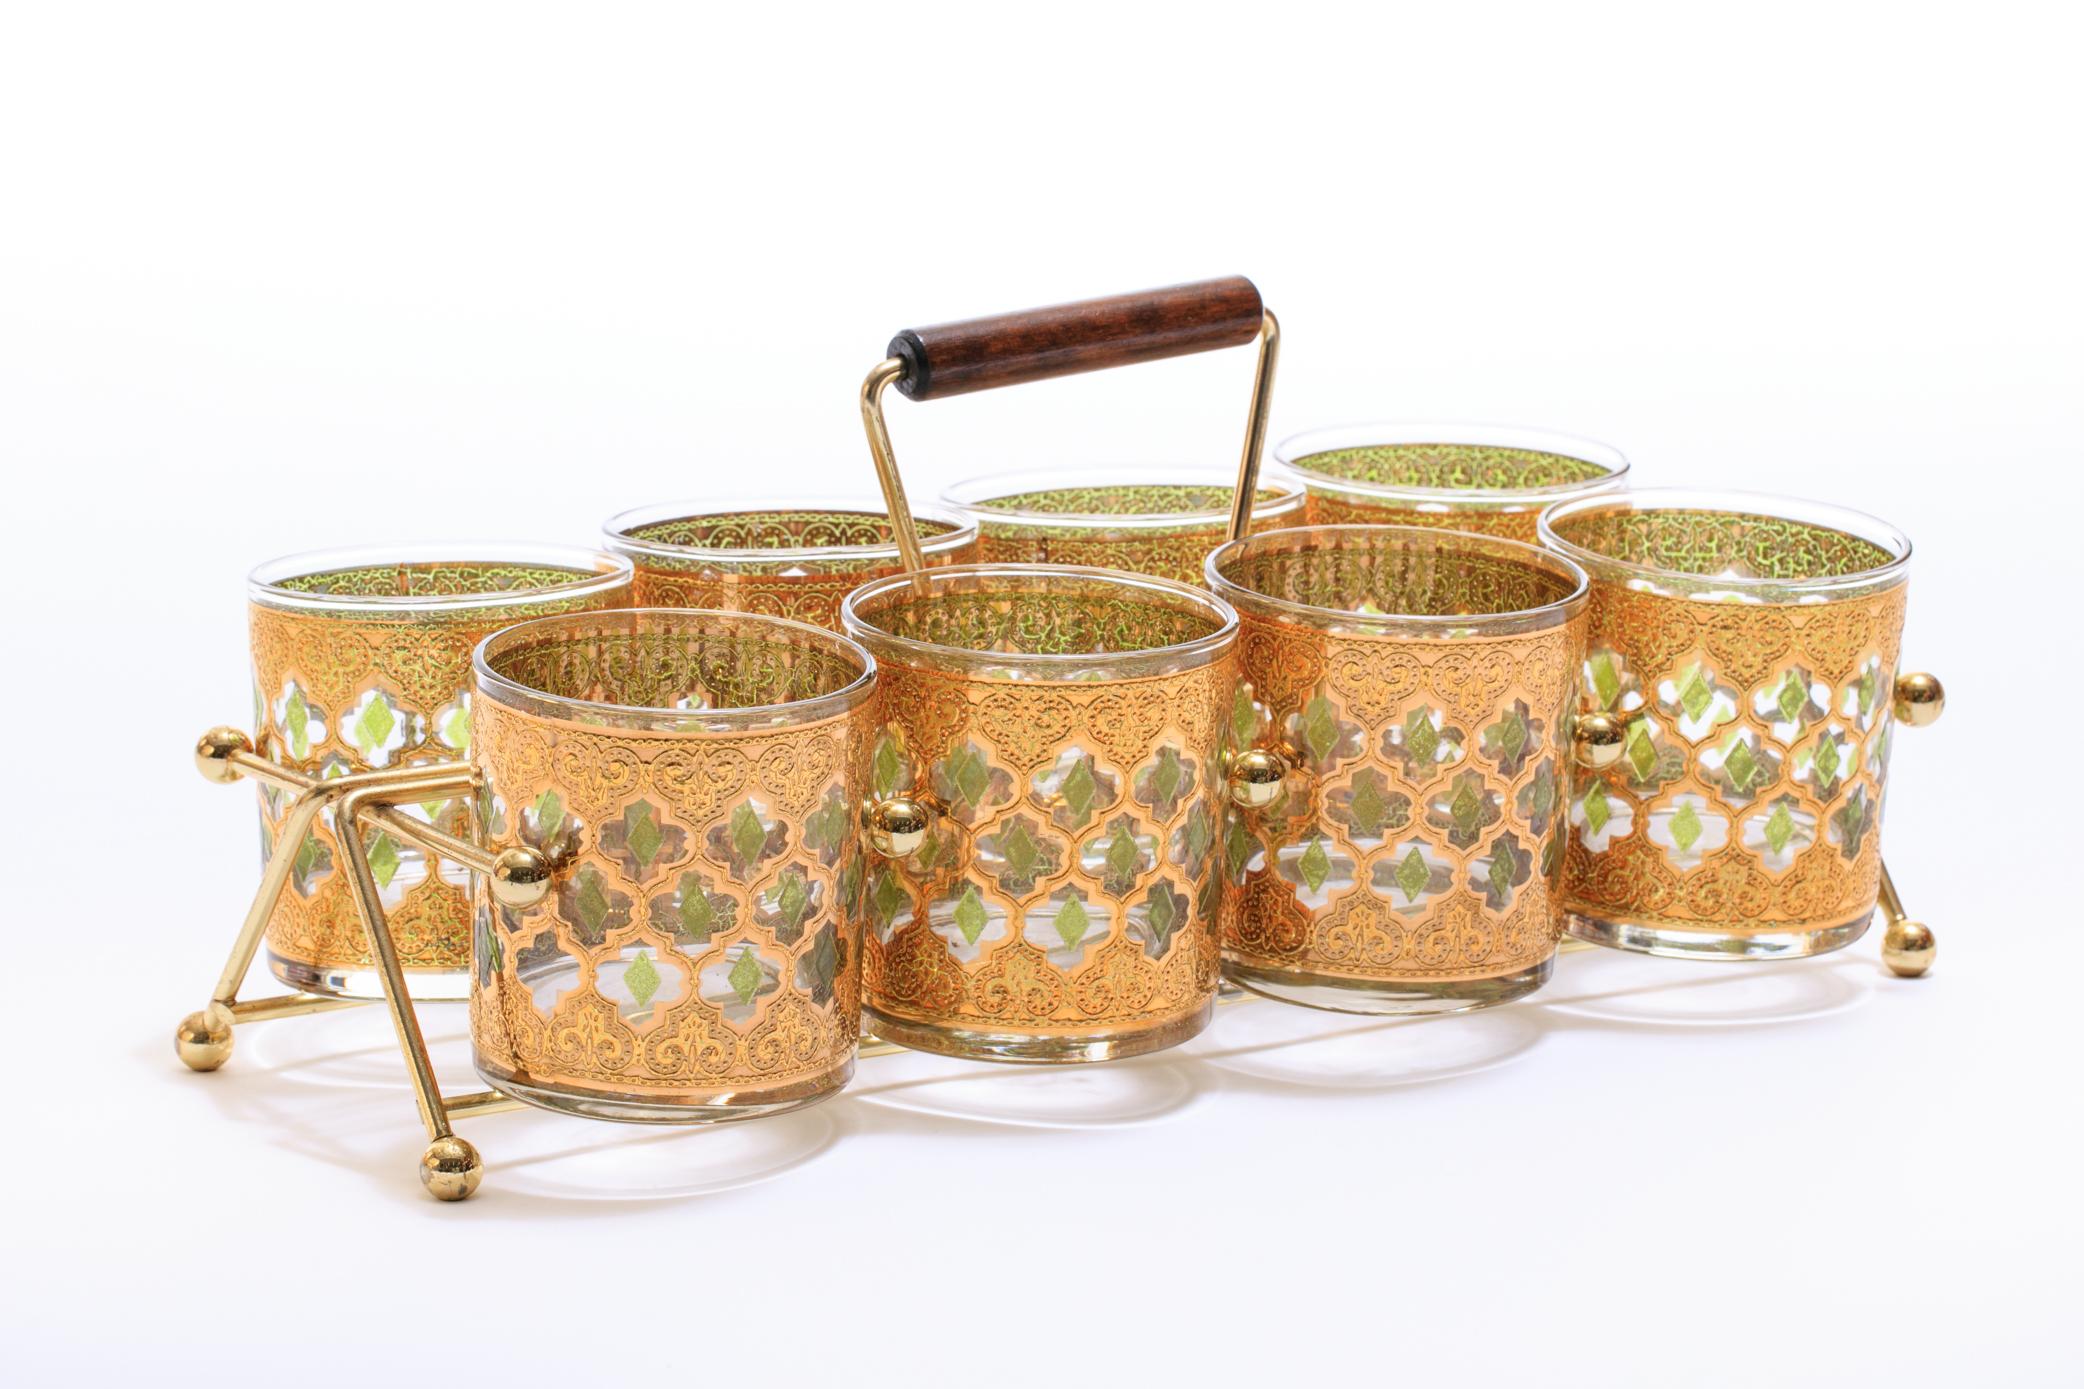 Hollywood Regency 22-Karat Gold Moroccan Themed Rocks Glasses with Carrying Tray, circa 1965